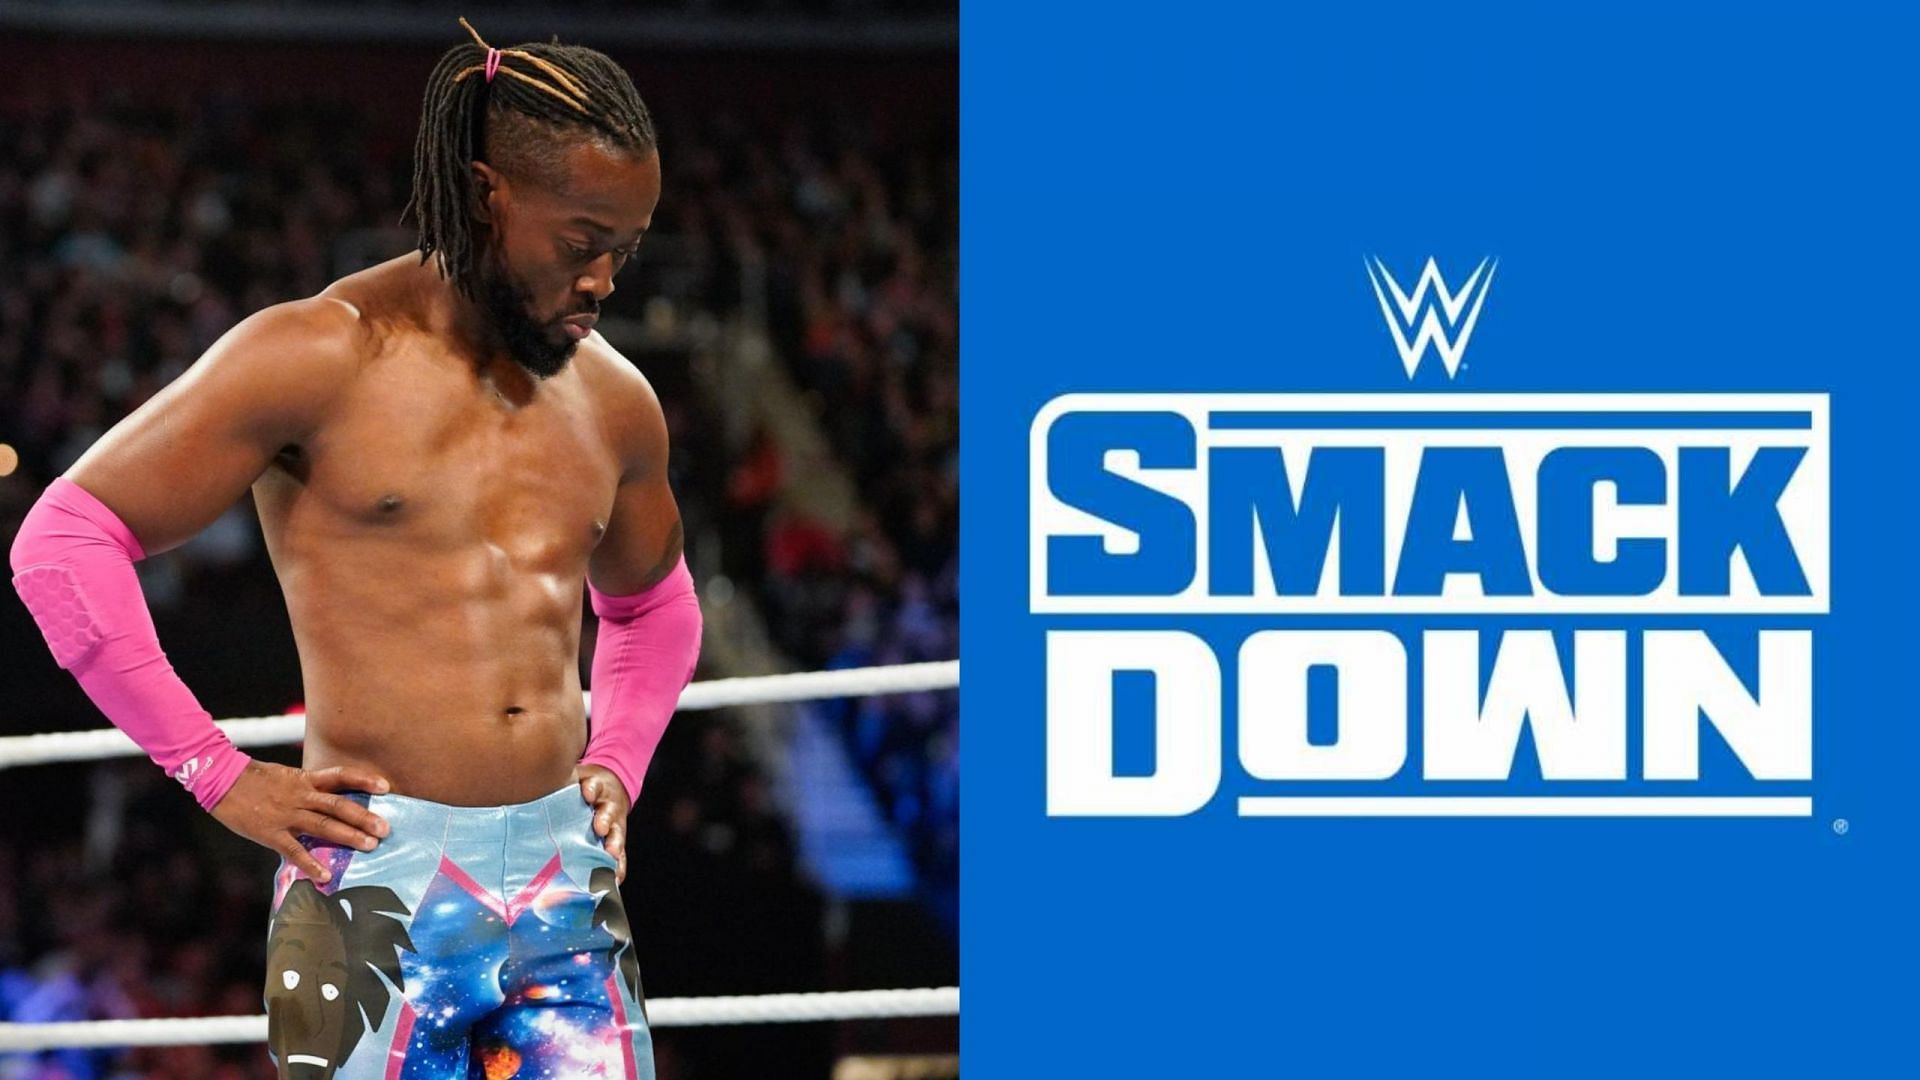 Kofi Kingston has been out of action since March due to an ankle injury.